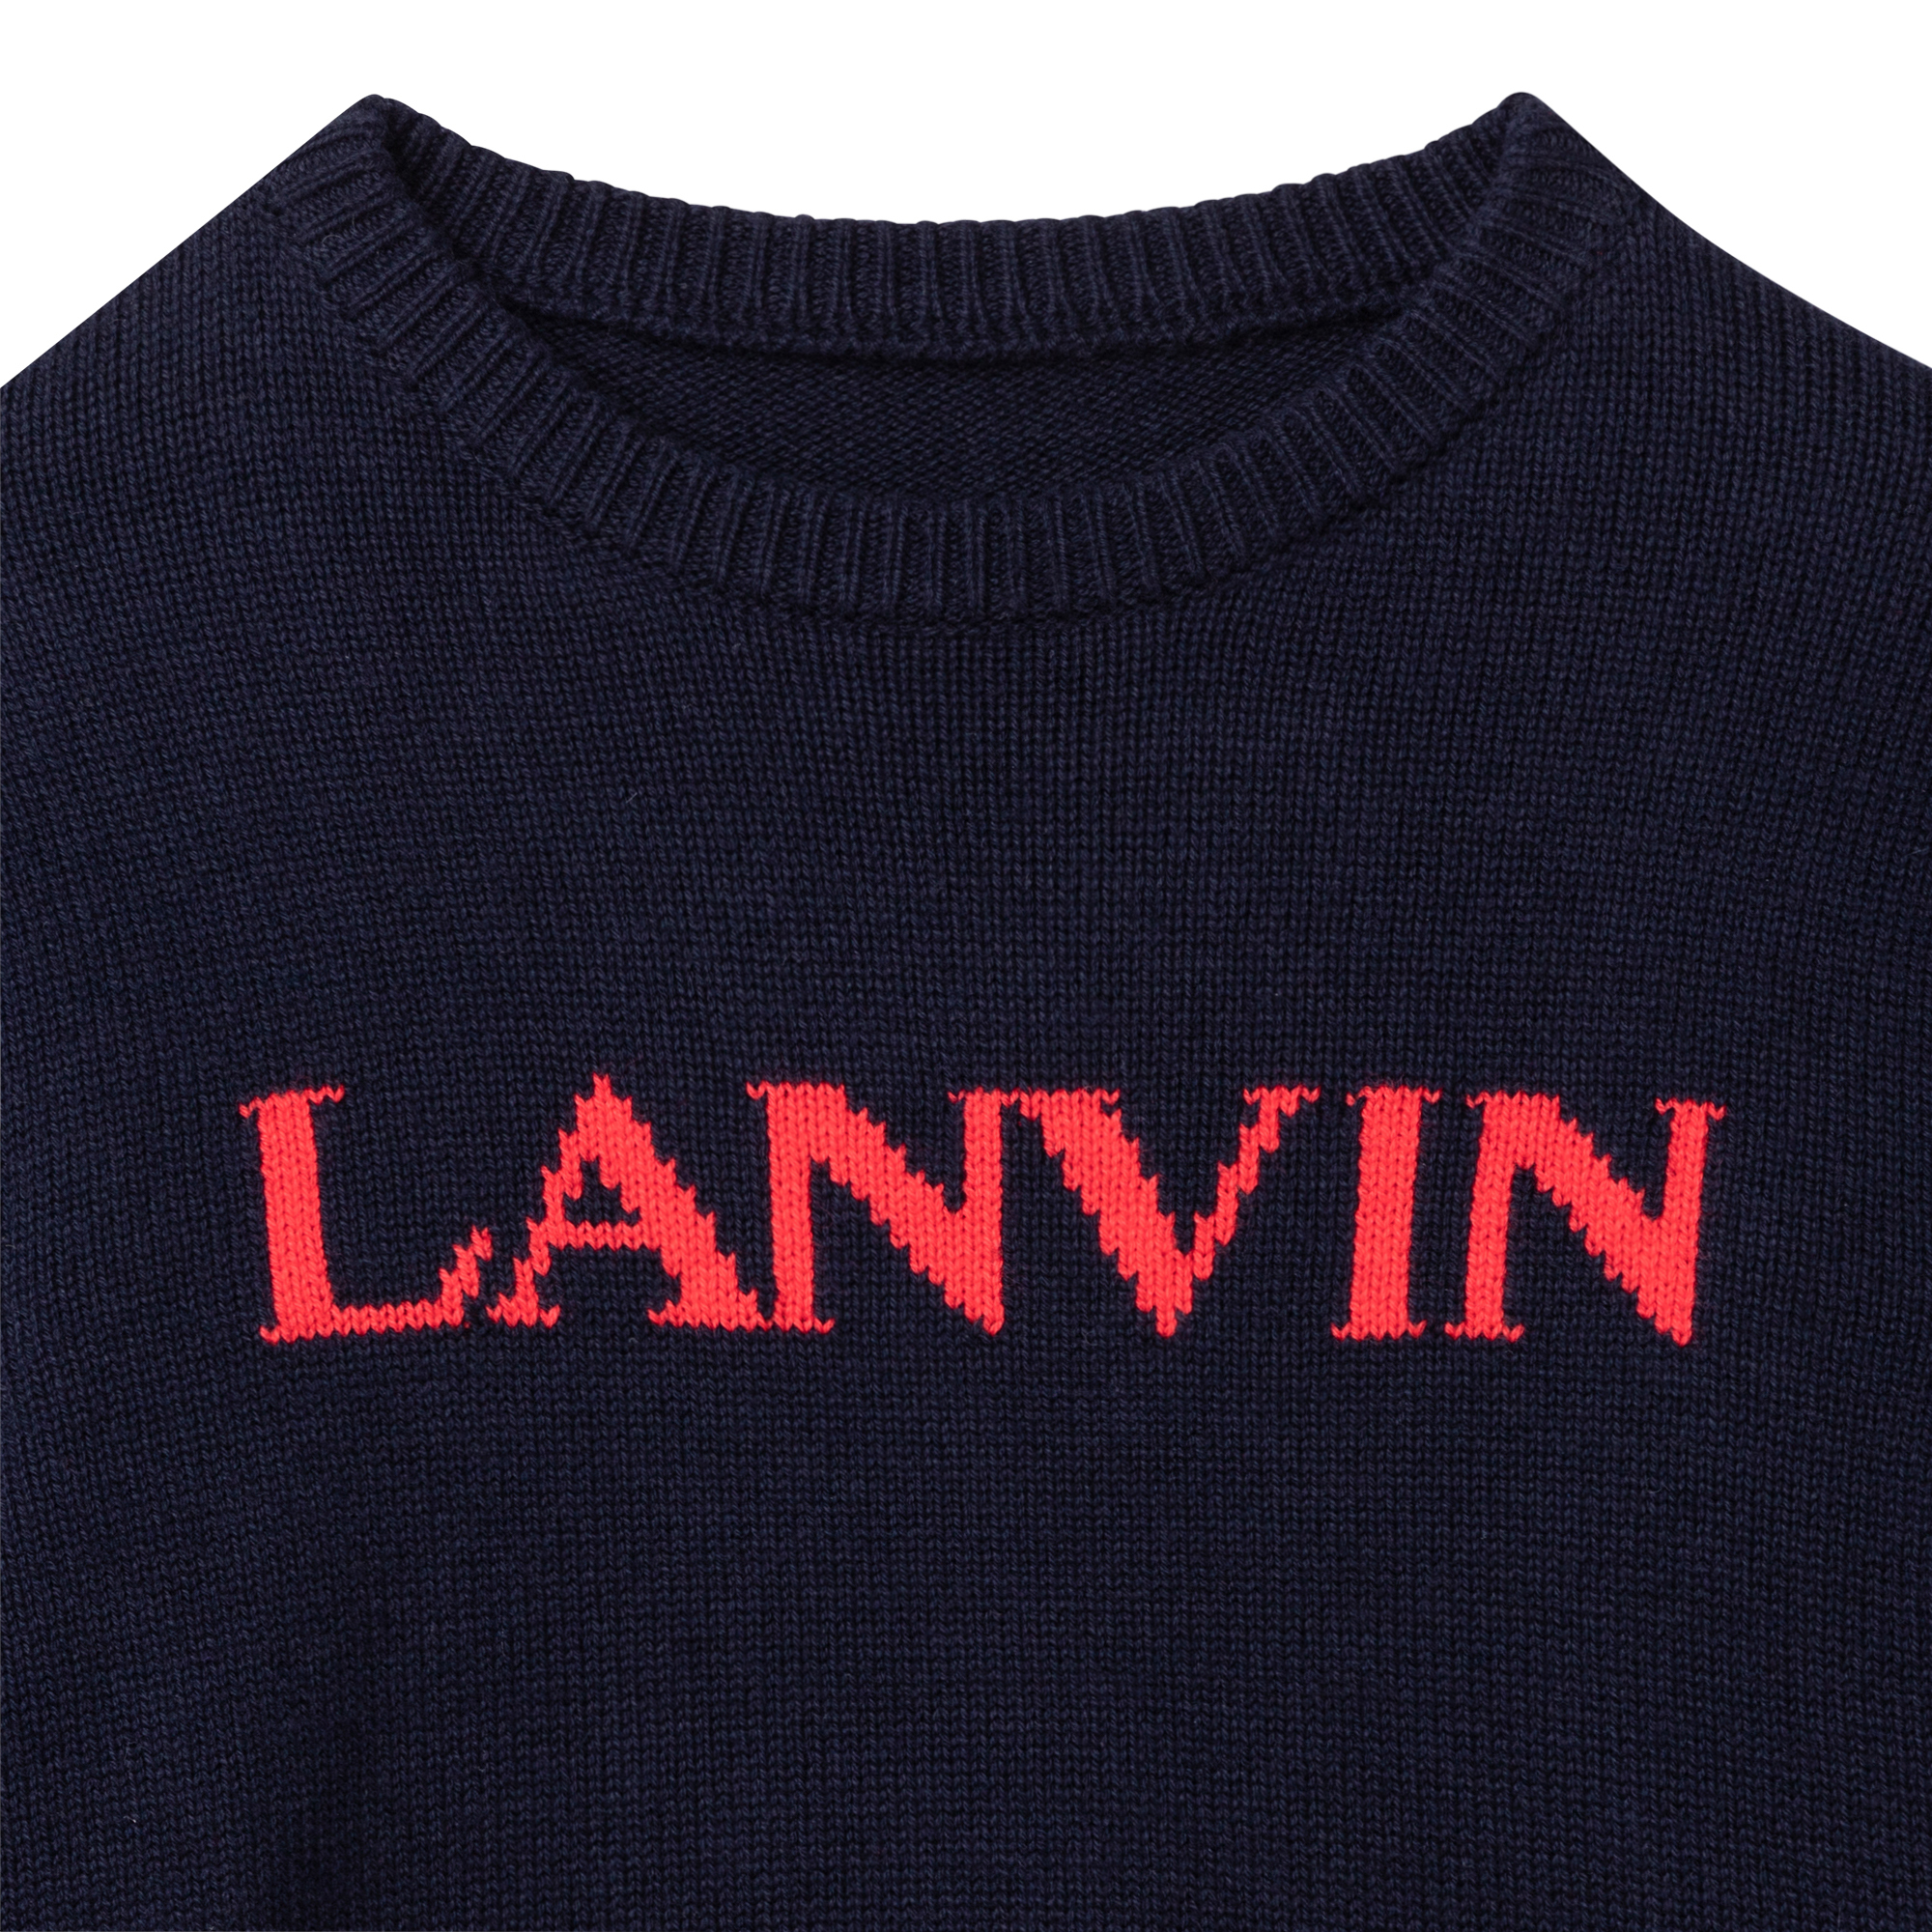 Wool and cotton sweater LANVIN for BOY